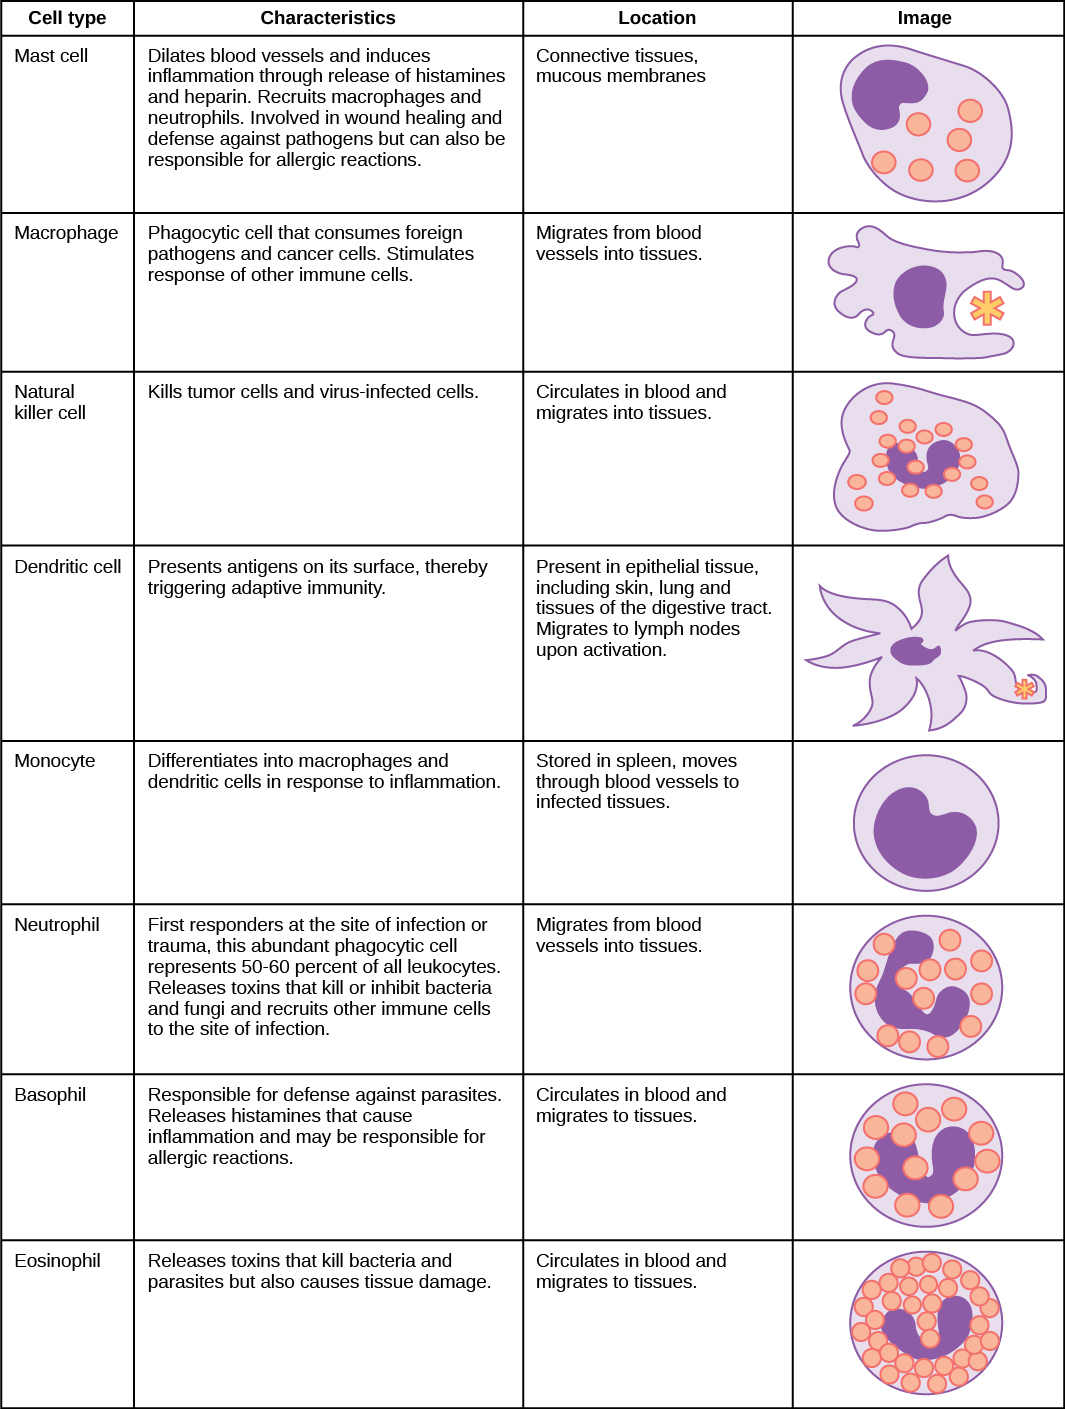 Various types of white blood cells and describes their function. Mast cells, natural killer cells, neutrophils, basophils and eosinophils are all filled with granules and have a horseshoe-shaped nucleus. Macrophages are irregular in shape, with a round nucleus. Dendrites have star-like projections and a small horseshoe shaped nucleus. Mast cells dilate blood vessels and induce inflammation through release of histamines and heparin. They also recruit macrophages and neutrophils, and are involved in wound healing and defense against pathogens, but can also be responsible for allergic reactions. They are found in connective tissue and mucous membranes. Macrophages are phagocytic cells that consume foreign pathogens and cancer cells. They stimulate response of other immune cells and migrate from blood vessels into tissues. Natural killer cells kill tumor cells and virus-infected cells. They circulate in blood and migrate into tissues. Dendritic cells present antigens on their surface, thereby triggering adaptive immunity. They are present in tissues in epithelial tissue, including skin, lung and tissues of the digestive tract. Migrate to lymph nodes upon activation. Monocytes differentiate into macrophages and dendritic cells in response to inflammation. They are stored in spleen, move through blood vessels to infected tissues. Neutrophils are first responders at the site of infection or trauma, these abundant phagocytic cell representing 50-60% of all leukocytes. Release toxins that kill or inhibit bacteria and fungi and recruit other immune cells to the site of infection. They migrate from blood vessels into tissues. Basophils are responsible for defense against parasites. They release histamines that cause inflammation and may be responsible for allergic reactions. They circulate in blood and migrate to tissues. Eosinophils release toxins that kill bacteria and parasites but also causes tissue damage. They circulate in blood and migrate to tissues.